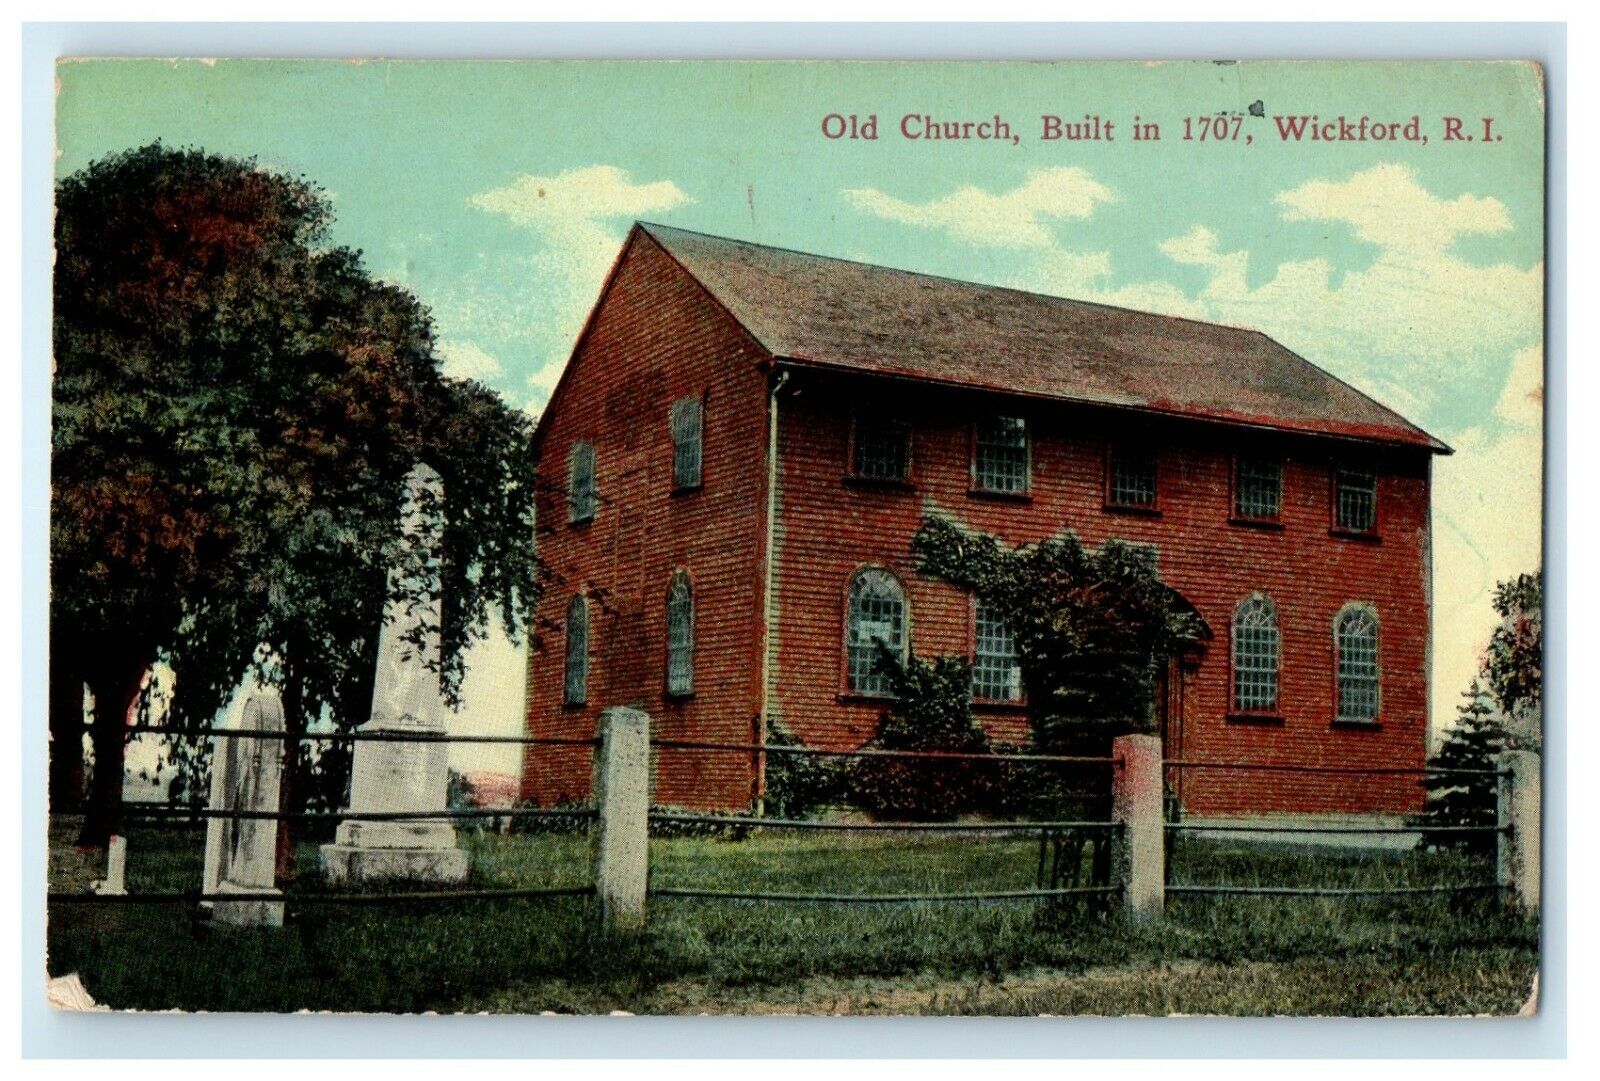 1913 Old Church, Built In 1707 Wickford Rhode Island RI Posted Antique Postcard